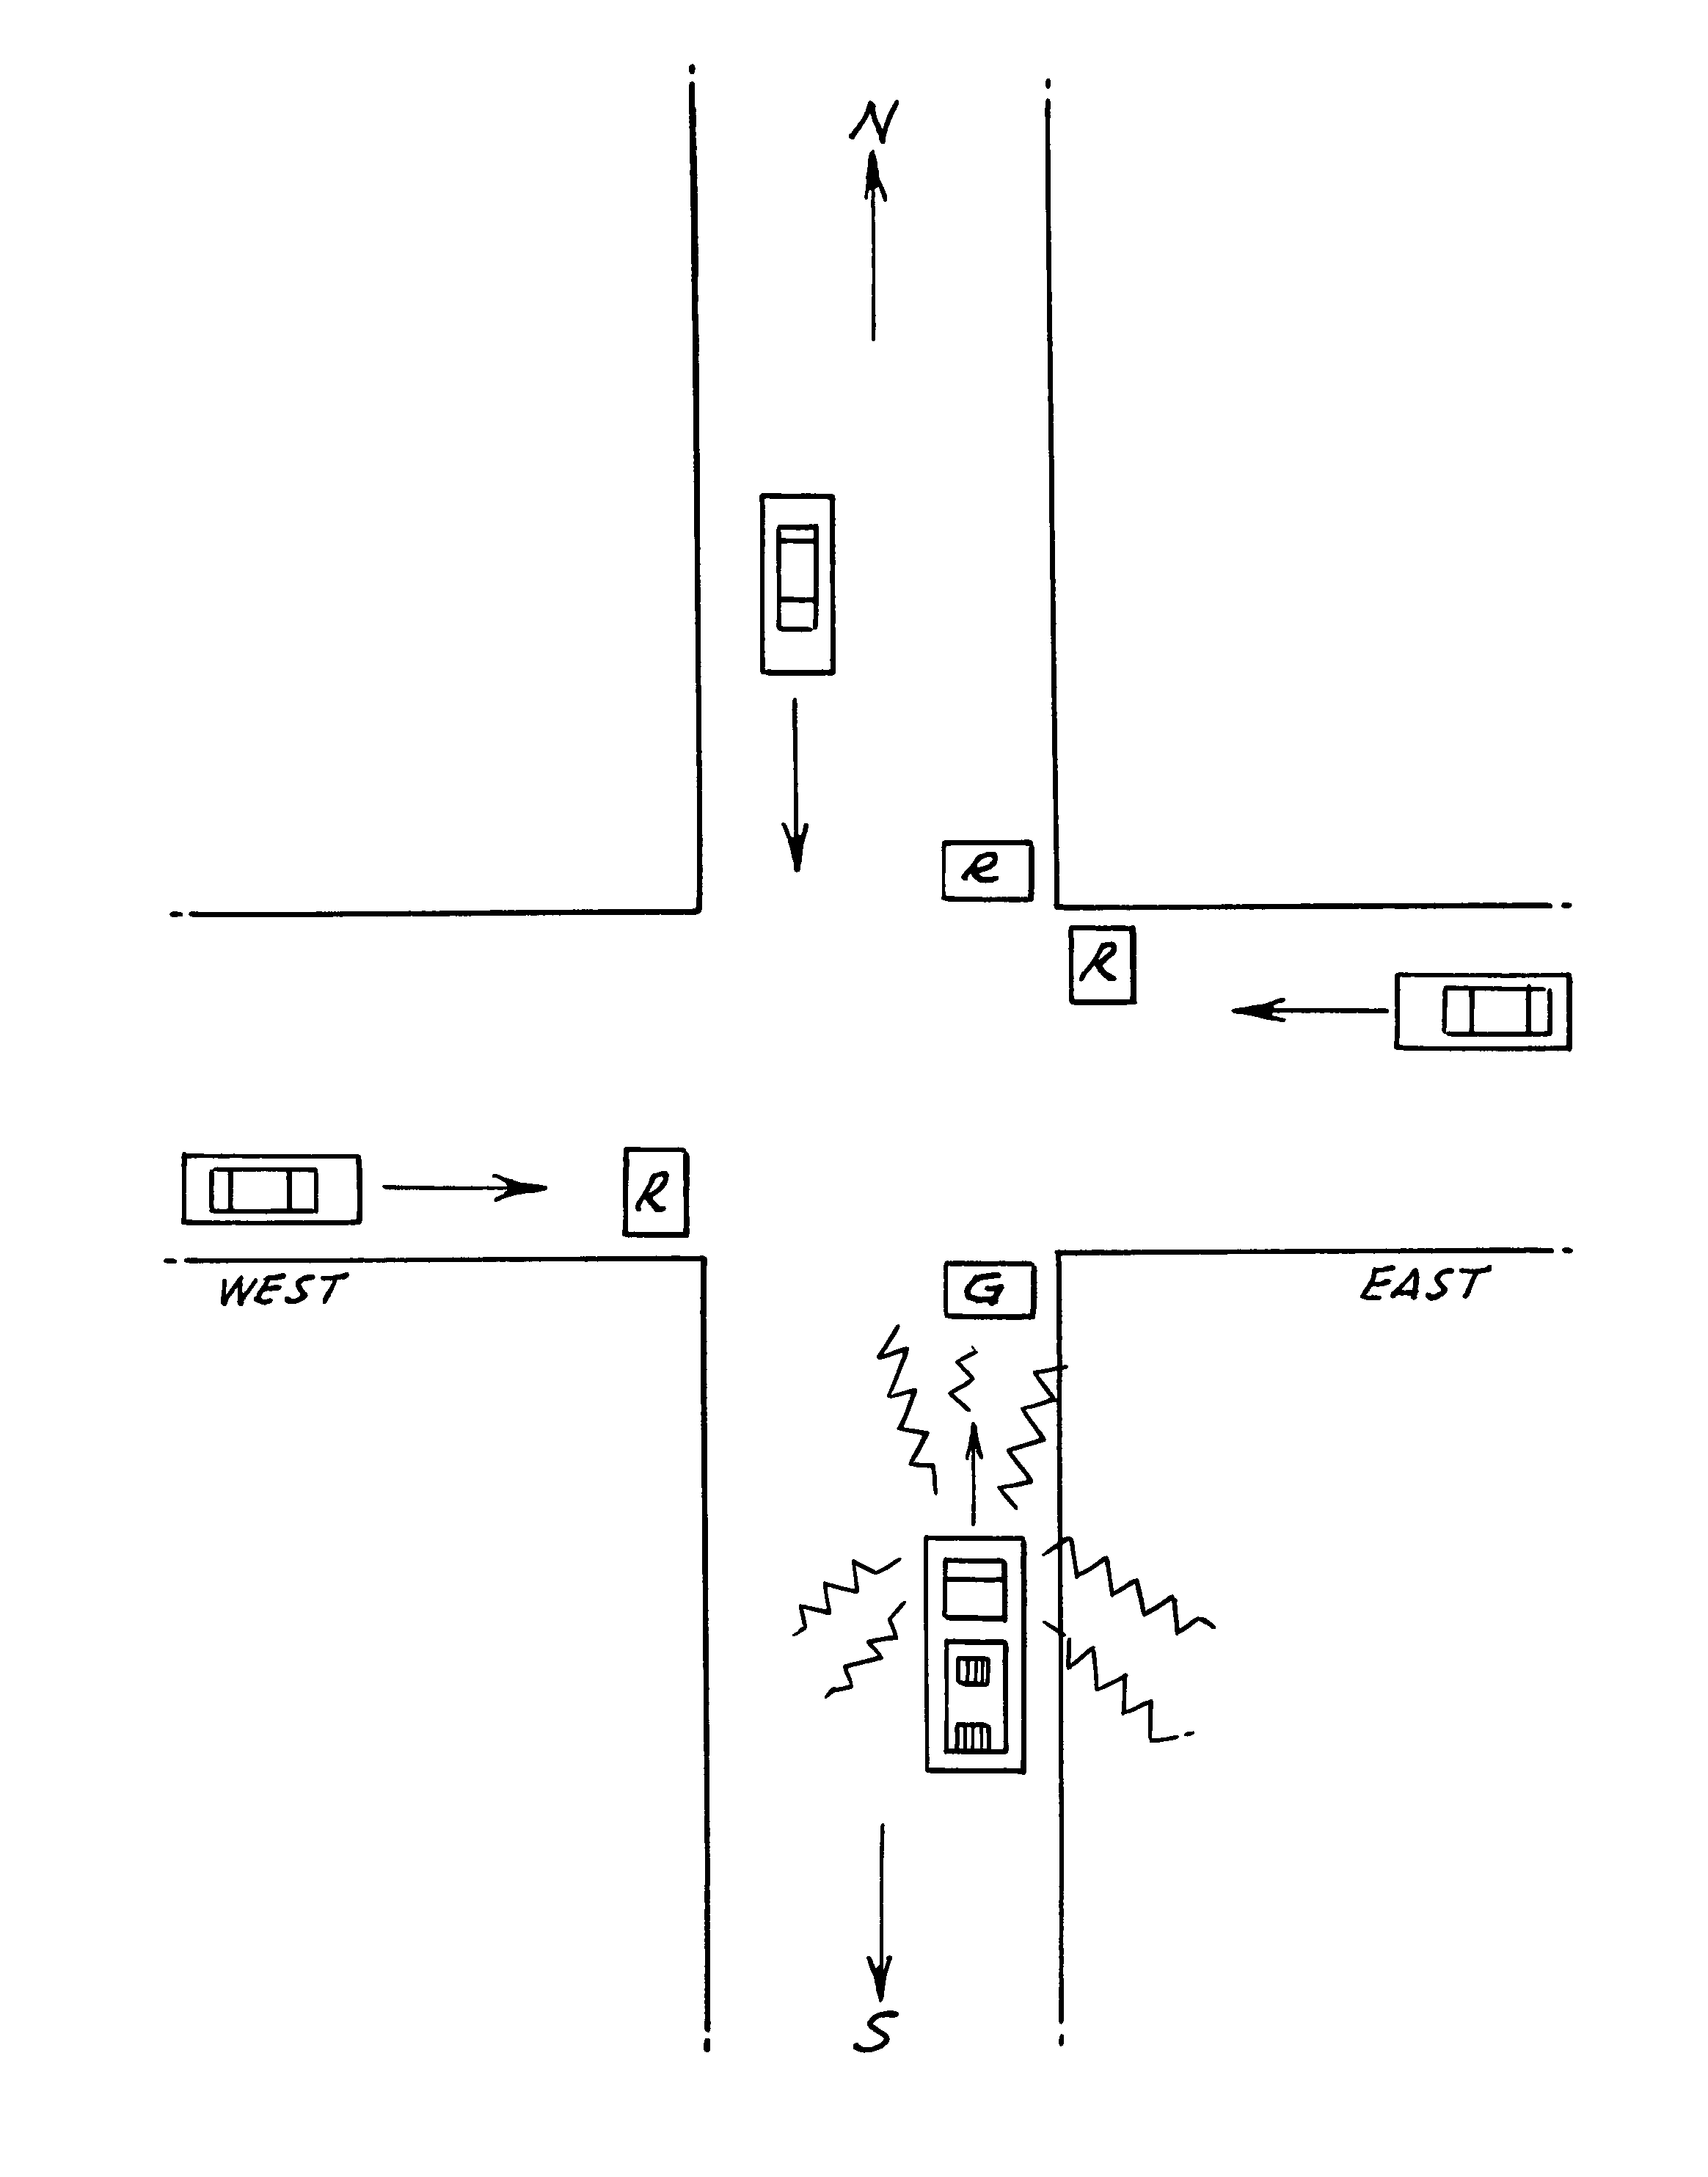 Methods and apparatus for electronically detecting siren sounds for controlling traffic control lights for signalling the right of way to emergency vehicles at intersections or to warn motor vehicle operators of an approaching emergency vehicle